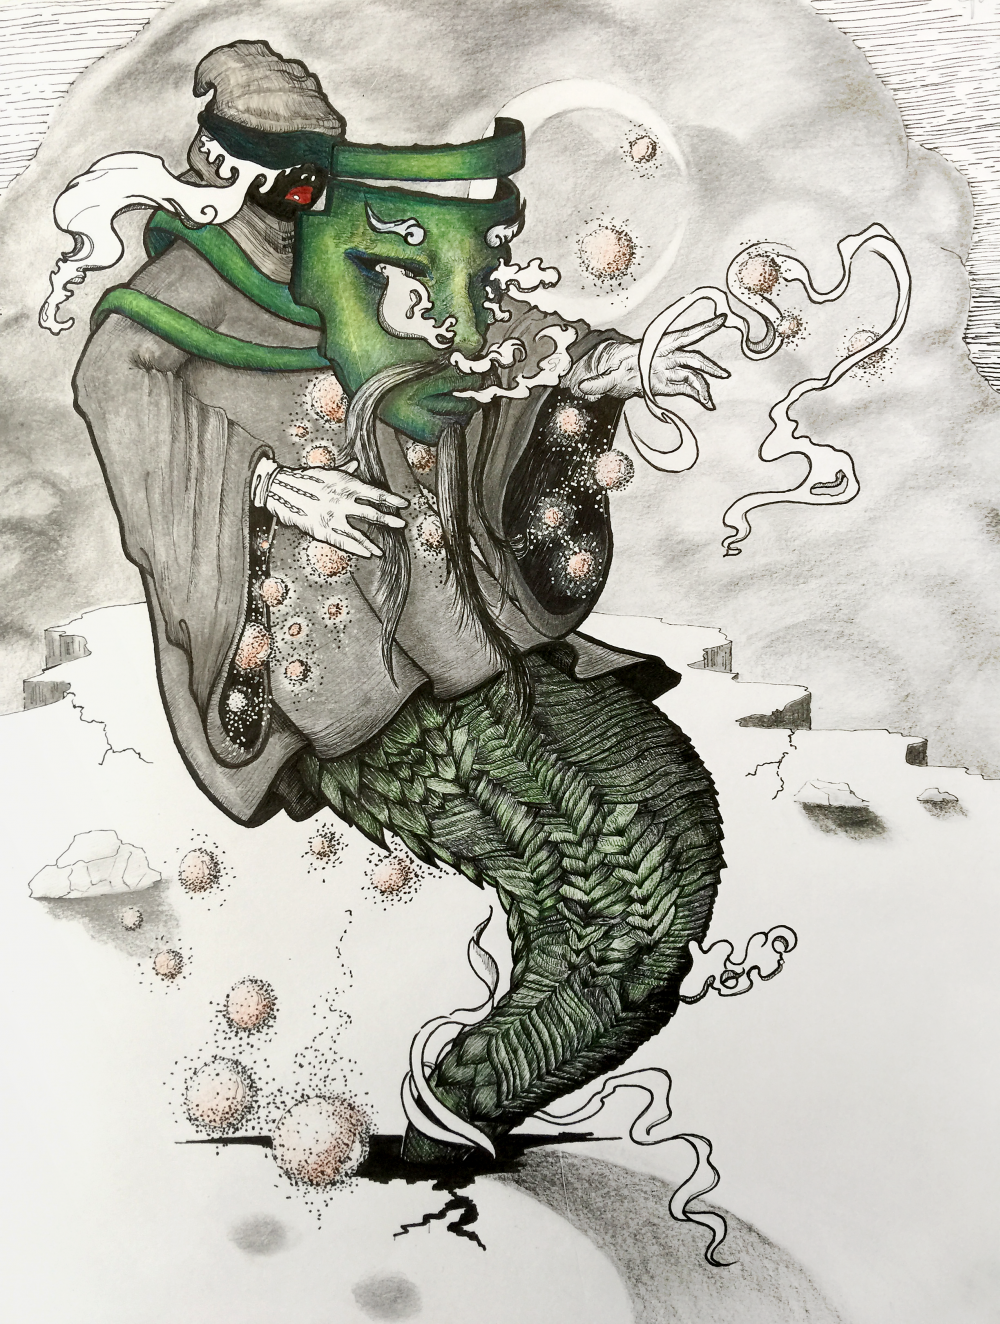 A masked character with a robe, gloves, and serpent-like body floating above a crack in the foreground, glowing orbs protrude from it's sleeves and there are grey clouds in the background.